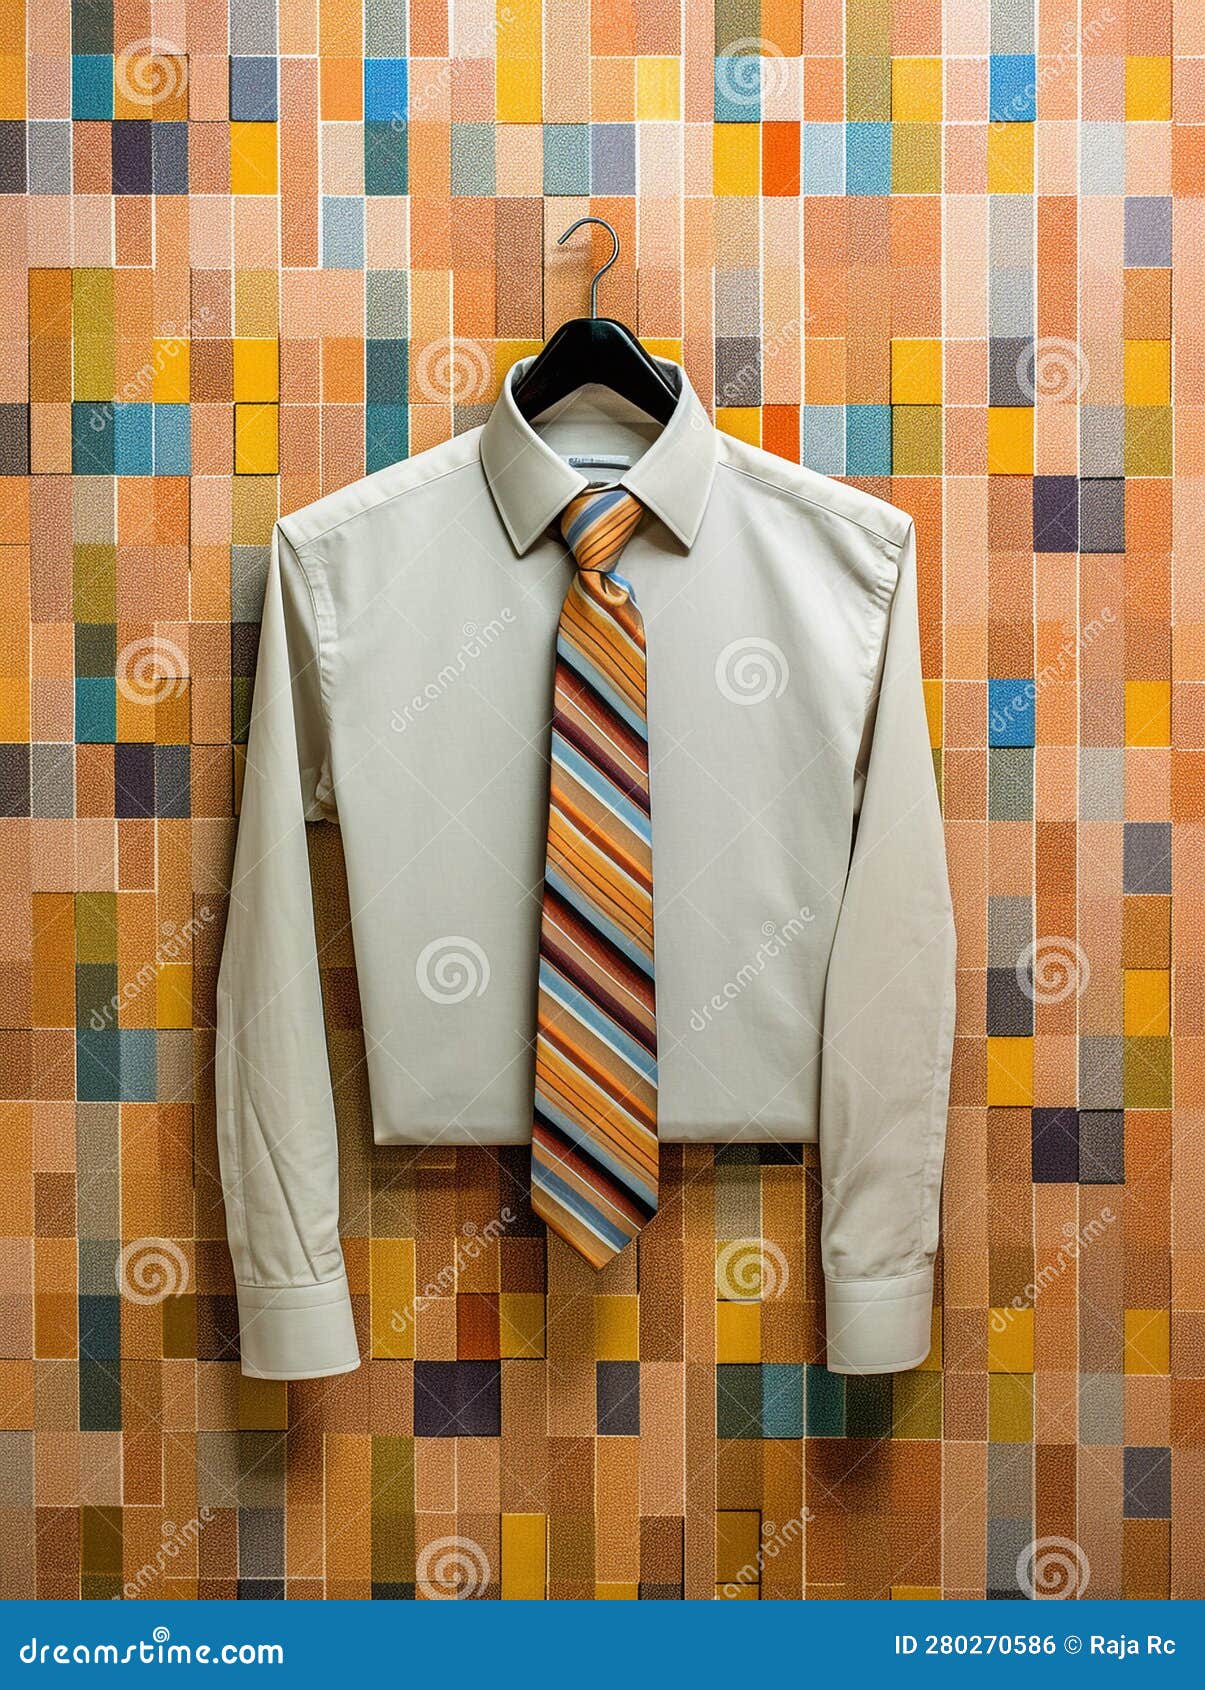 shirt for sophisticated occasions